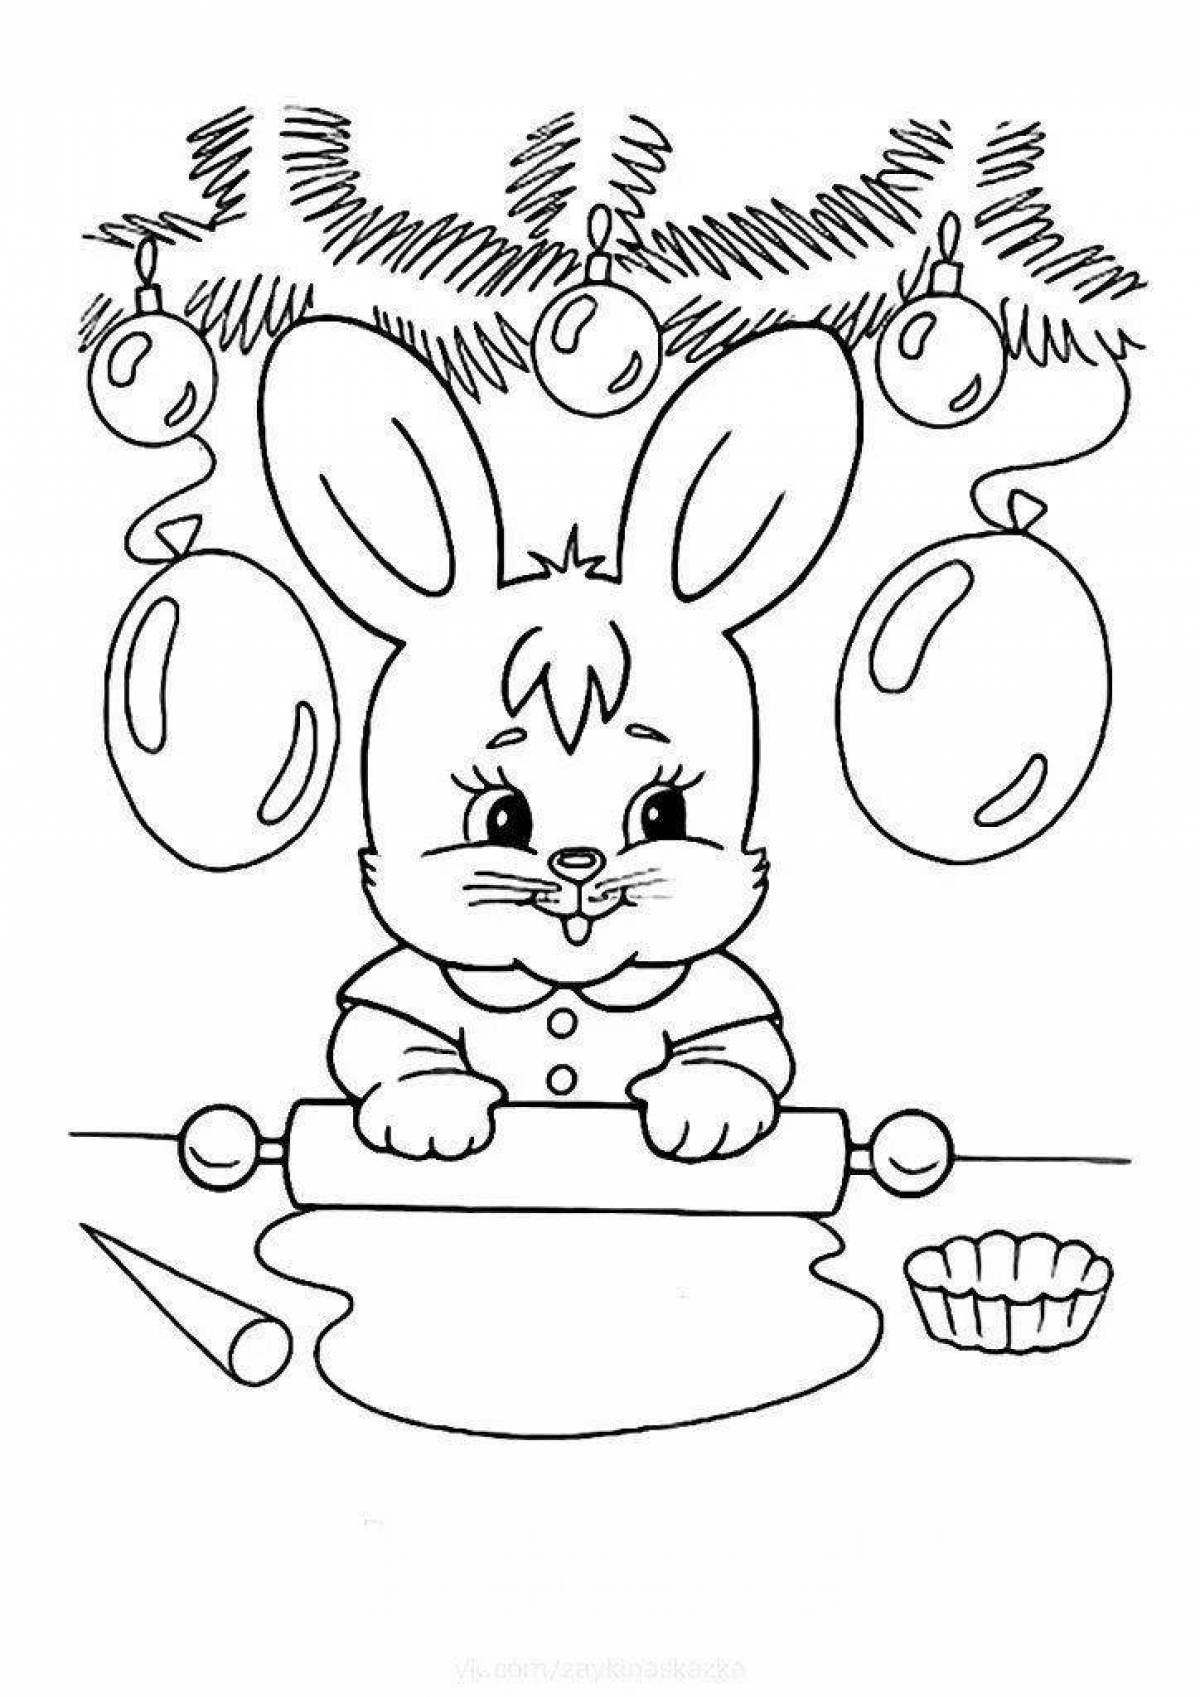 Coloring book bizarre year of the hare